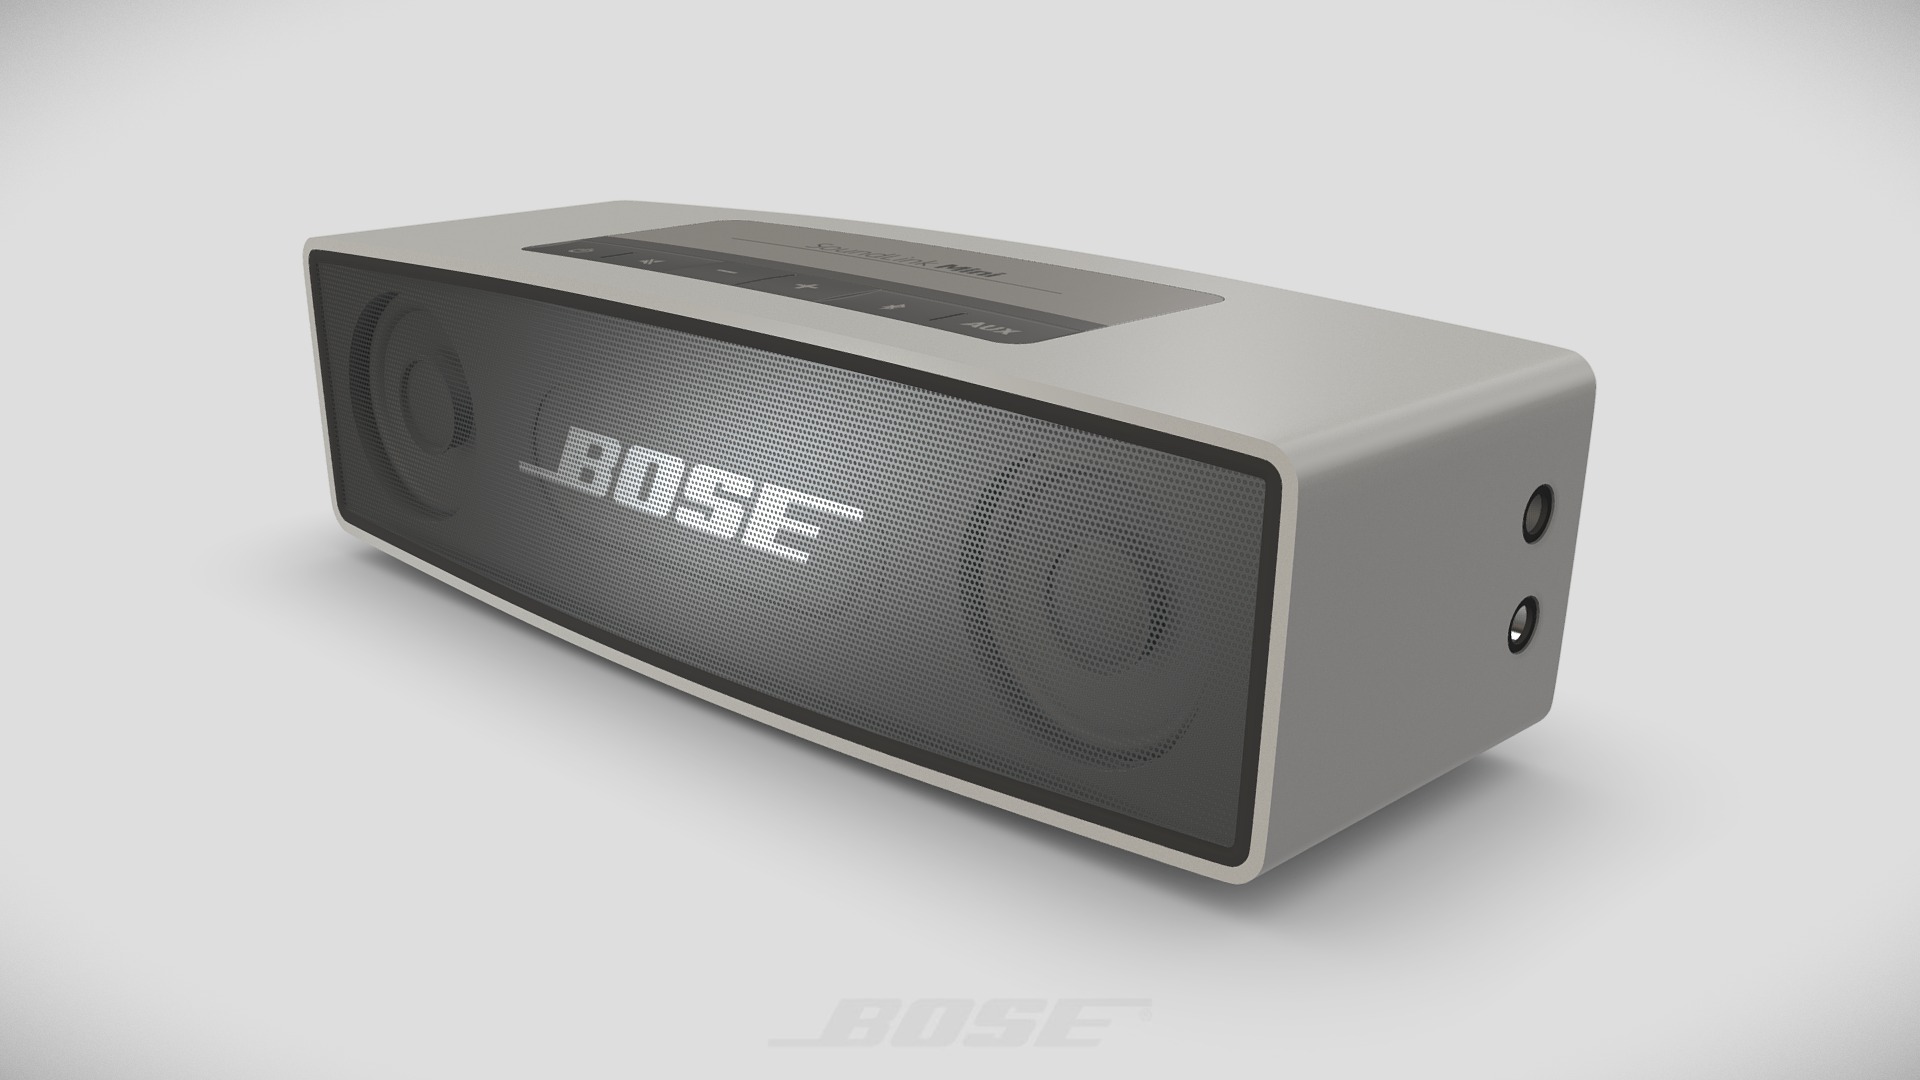 3D model Bose Soundlink Mini - This is a 3D model of the Bose Soundlink Mini. The 3D model is about a rectangular electronic device.